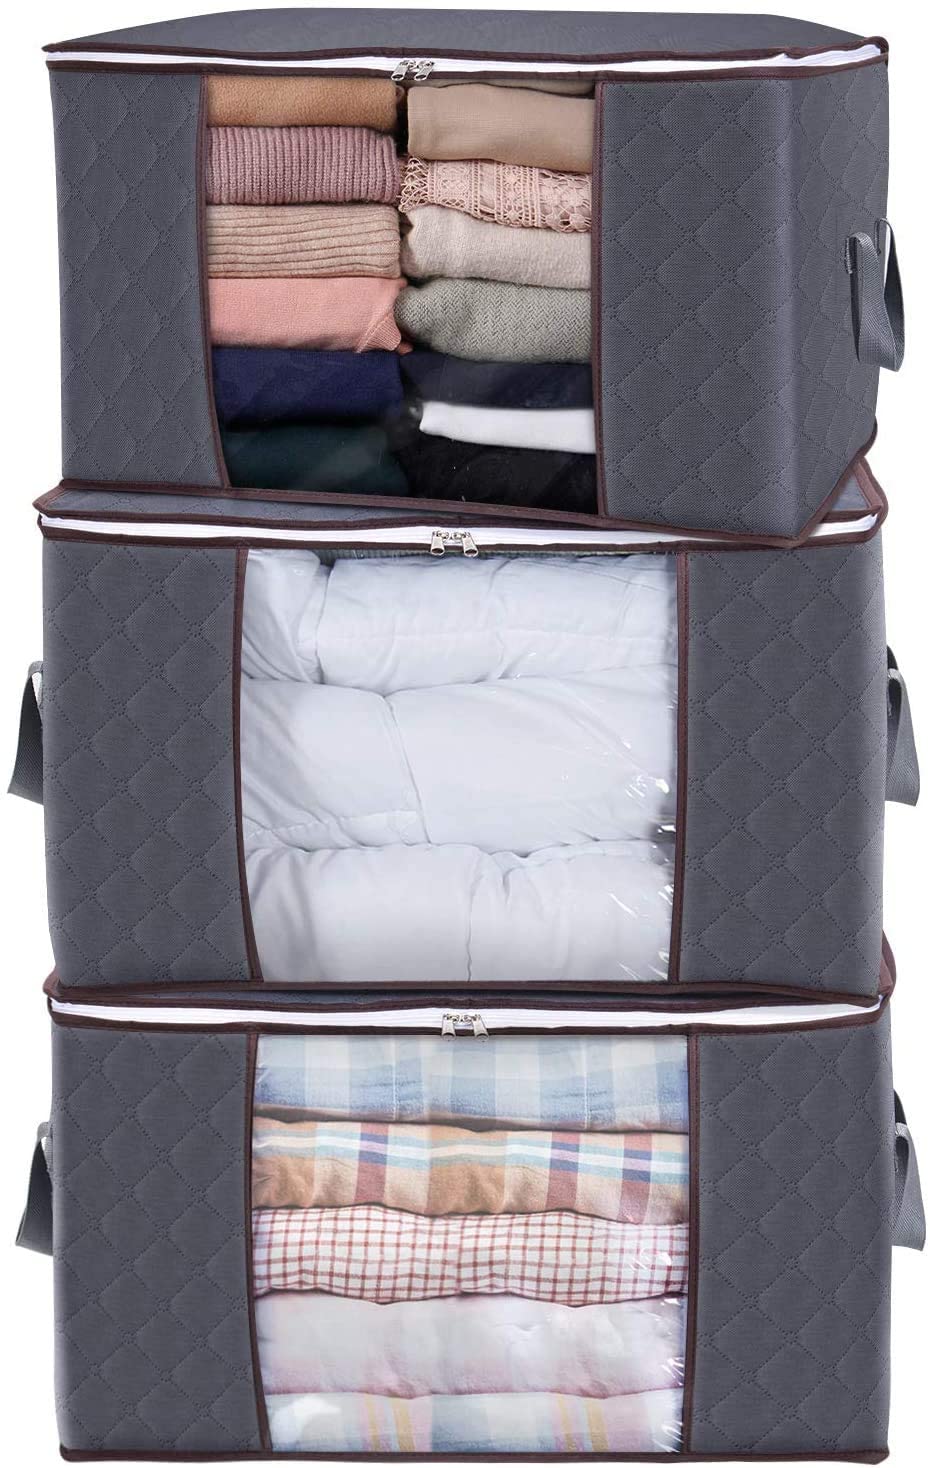 Lifewit-Large-Capacity-Clothes-Storage-Bag. Home Organization Hacks, Ideas, and Tips from Lifewit